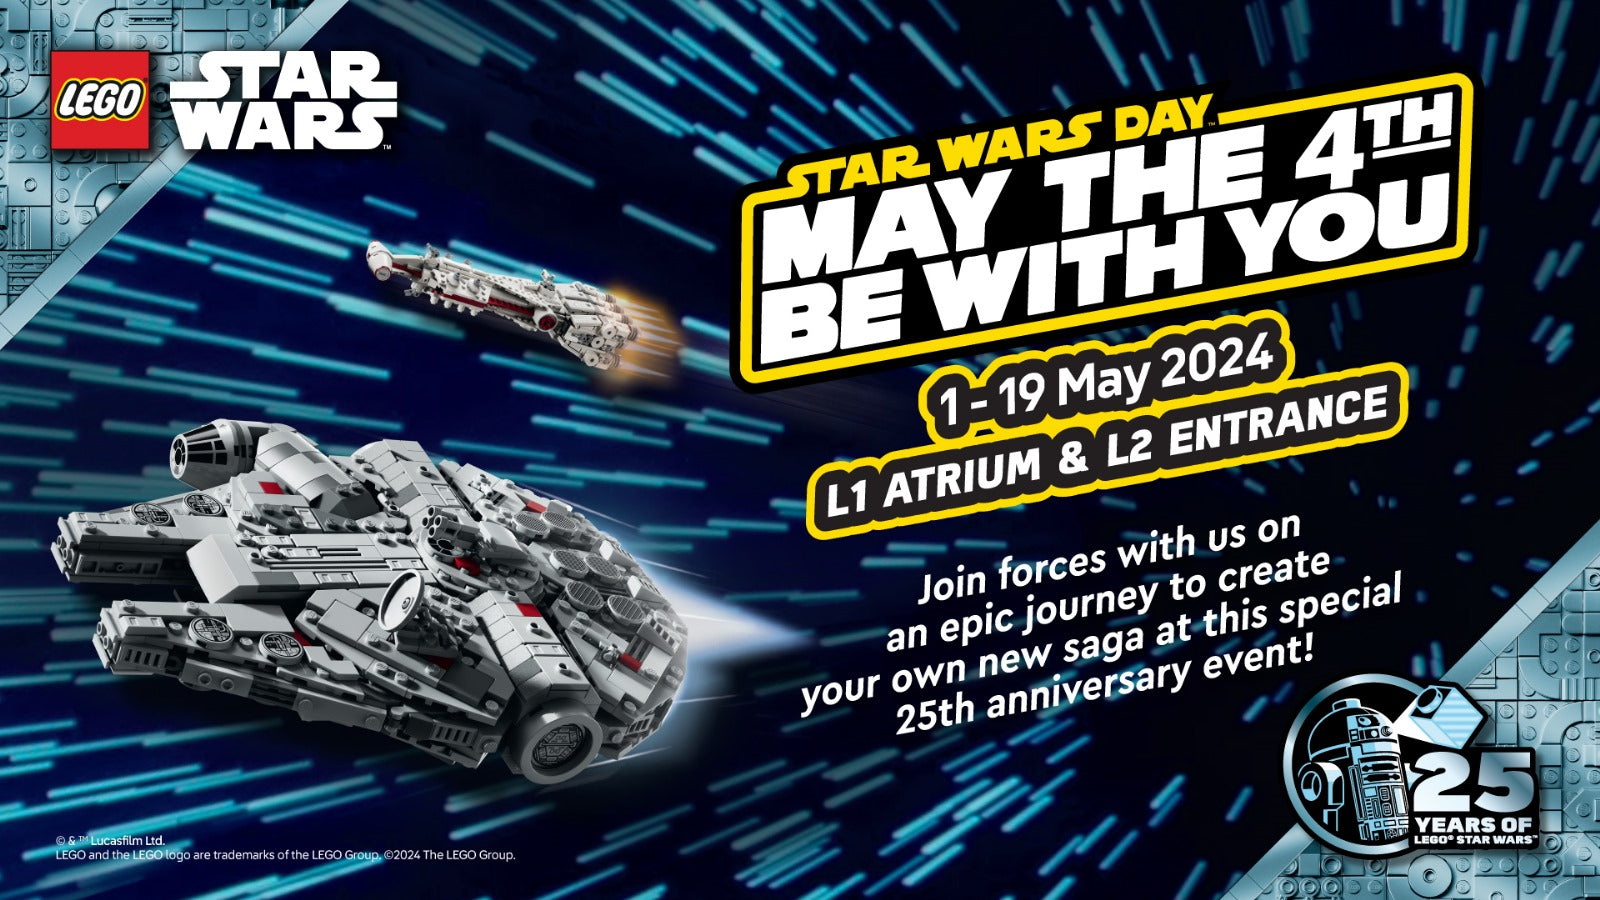 The LEGO Group Celebrates 25 Years of LEGO Star Wars with a LEGO Star Wars Pop-up at Wisma Atria!